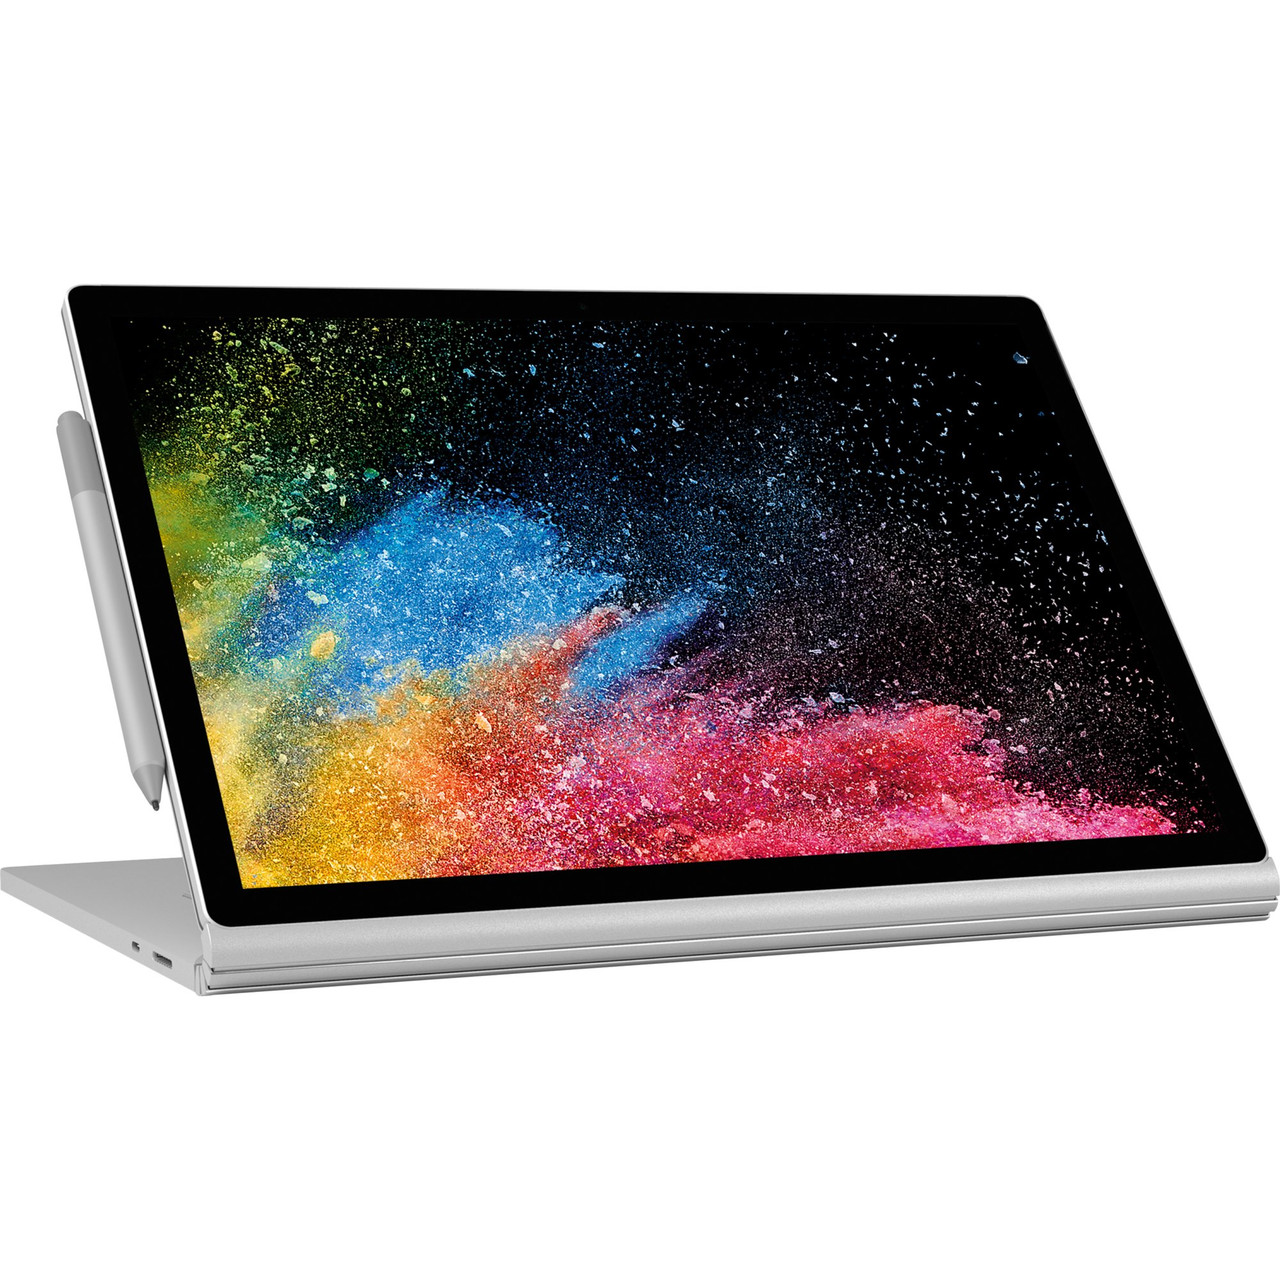 Microsoft Surface Book 2 - Intel Core i7 16GB 512GB - 13 Touchscreen  2-in-1 Laptop - Silver